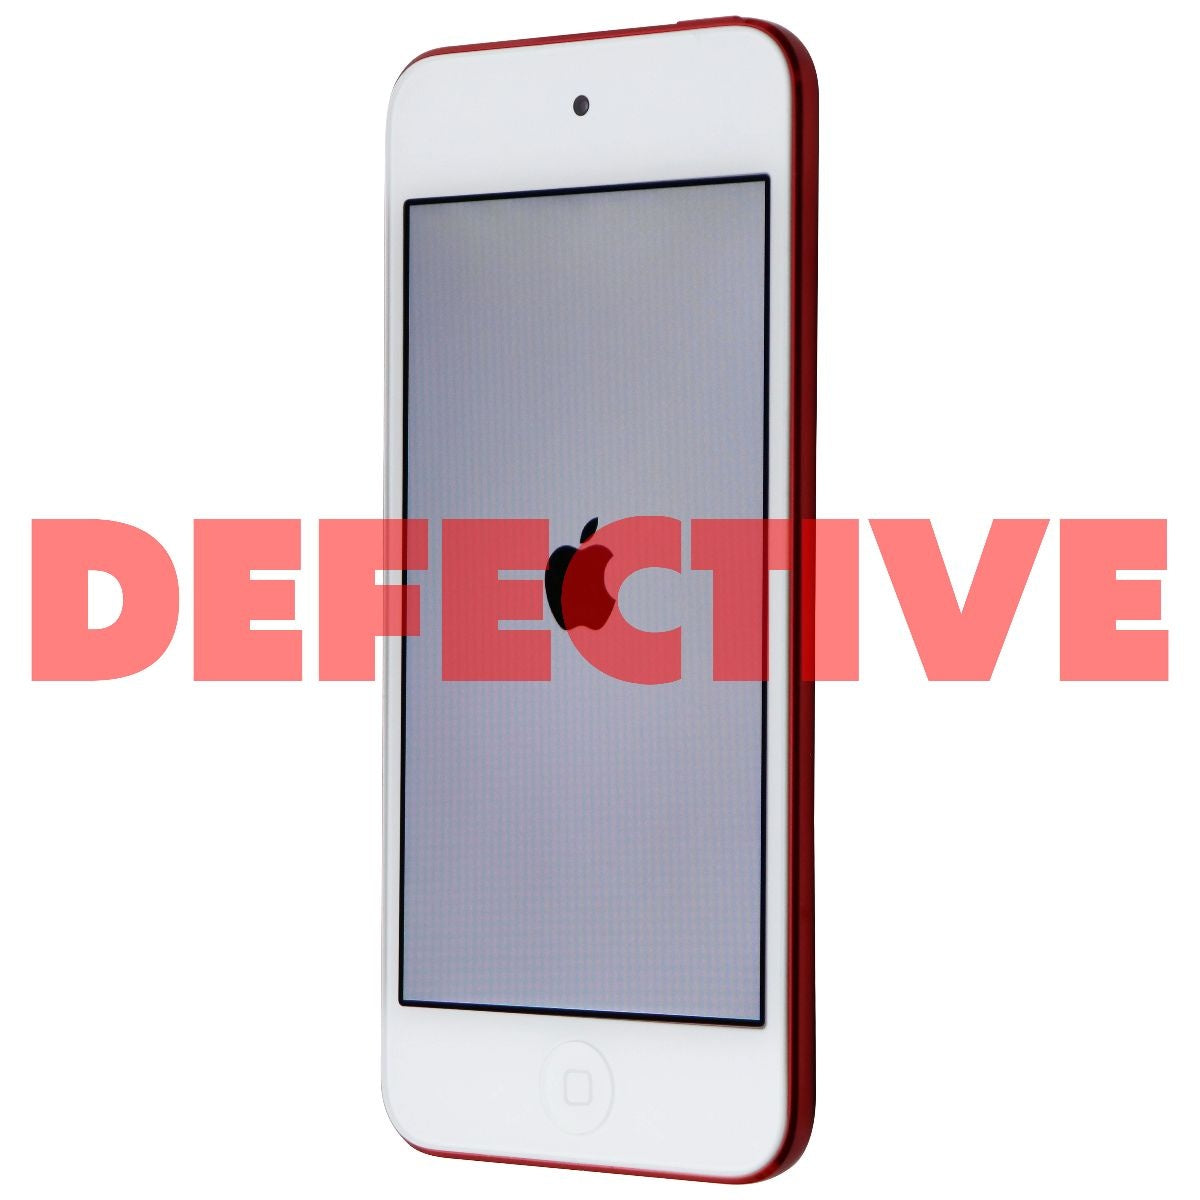 Apple iPod Touch 7th Generation (32GB) - (PRODUCT) RED (A2178 / MVHX2LL/A)